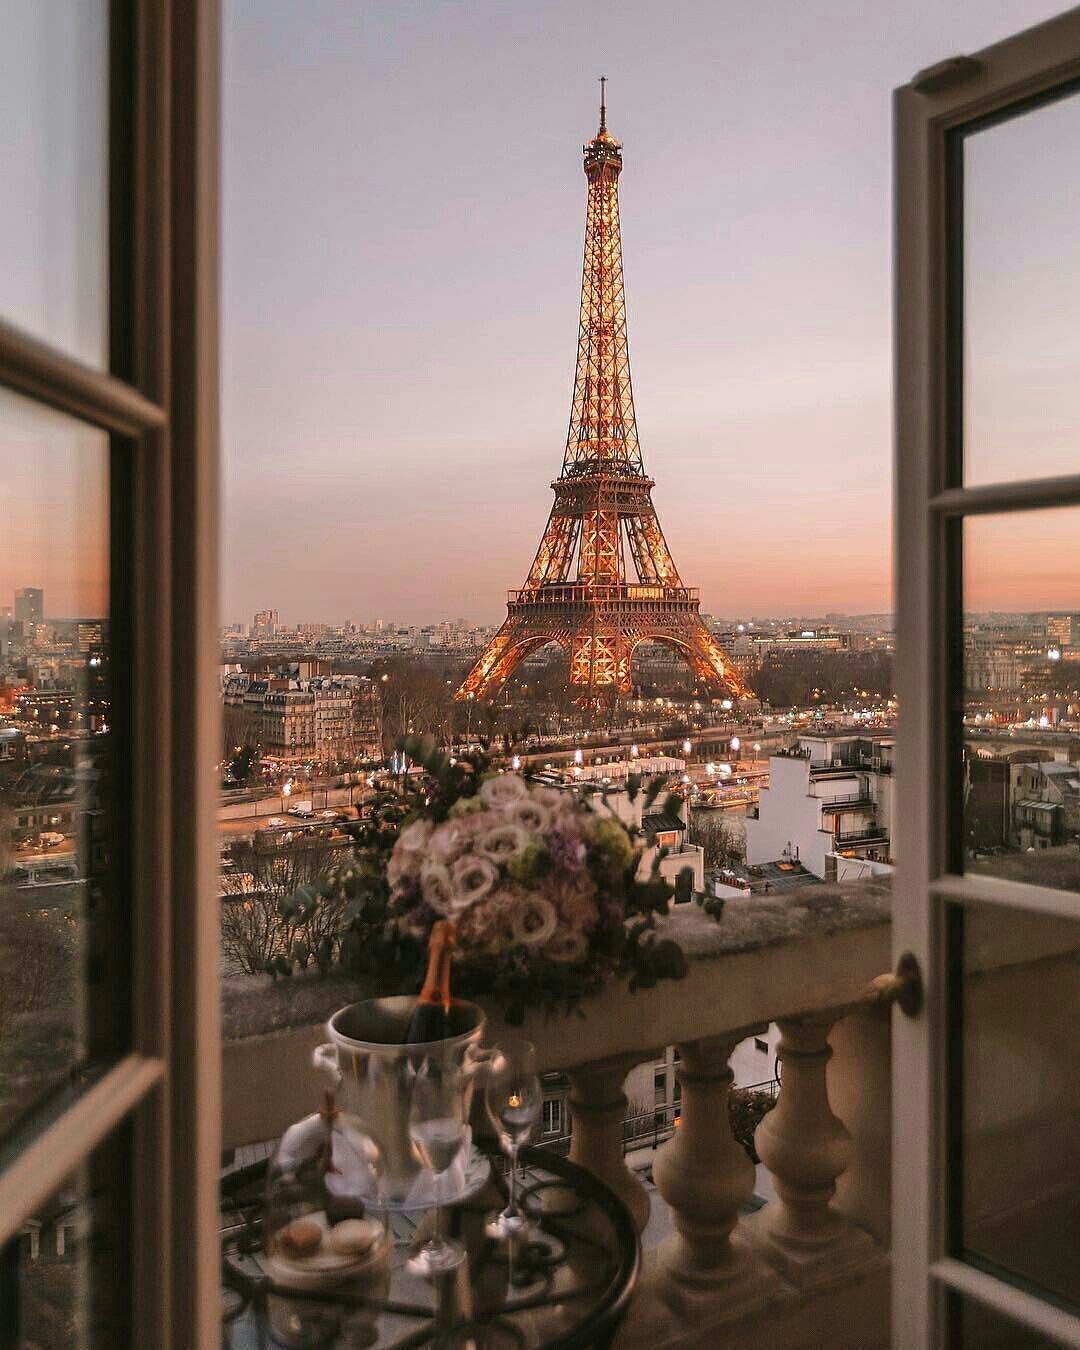 A balcony with champagne and flowers looking out to the Eiffel Tower - Eiffel Tower, Paris